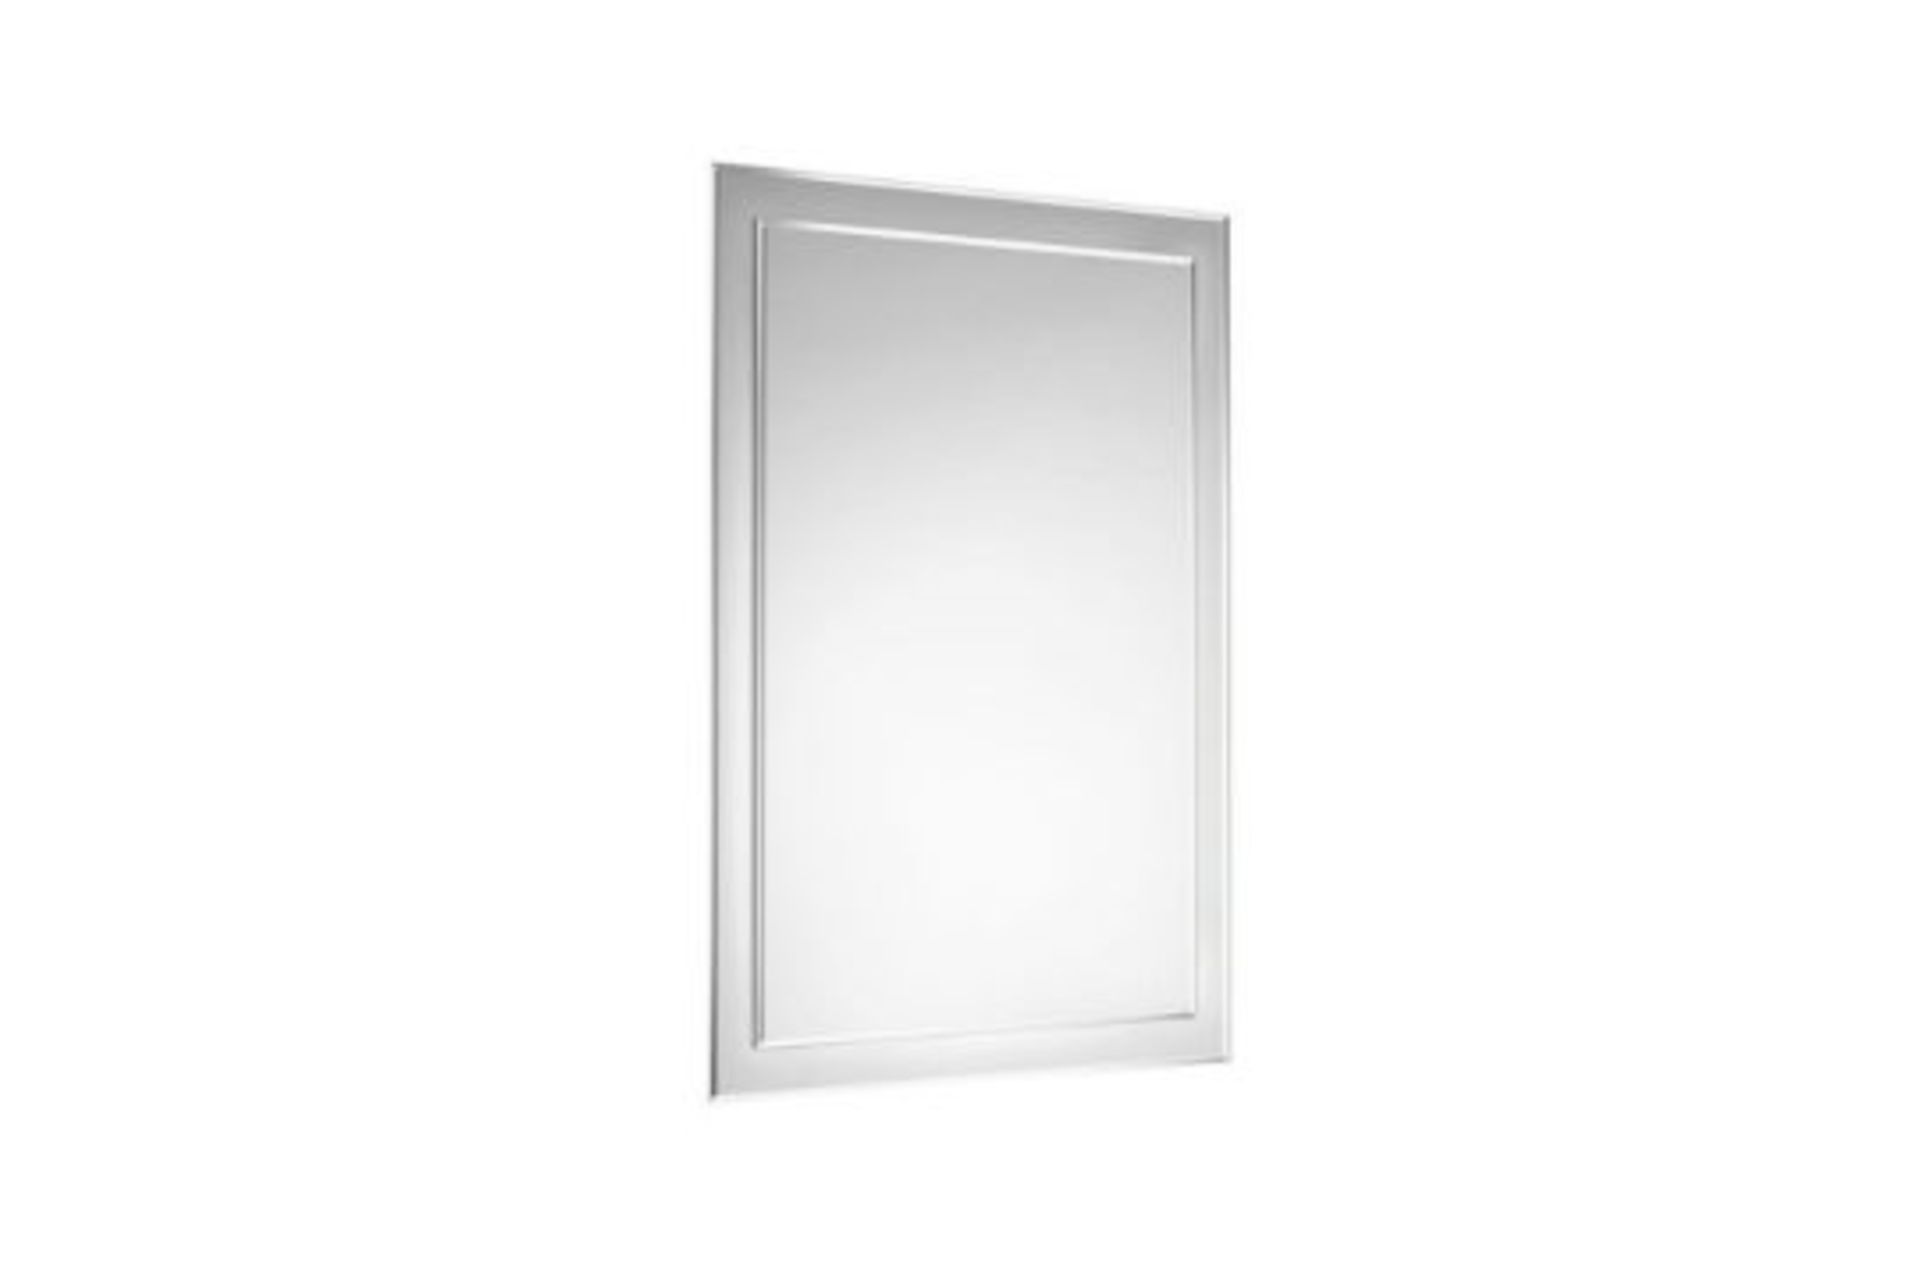 NEW & BOXED 500x700mm Bevel Mirror . Comes fully assembled for added convenience Versatile... - Image 2 of 2